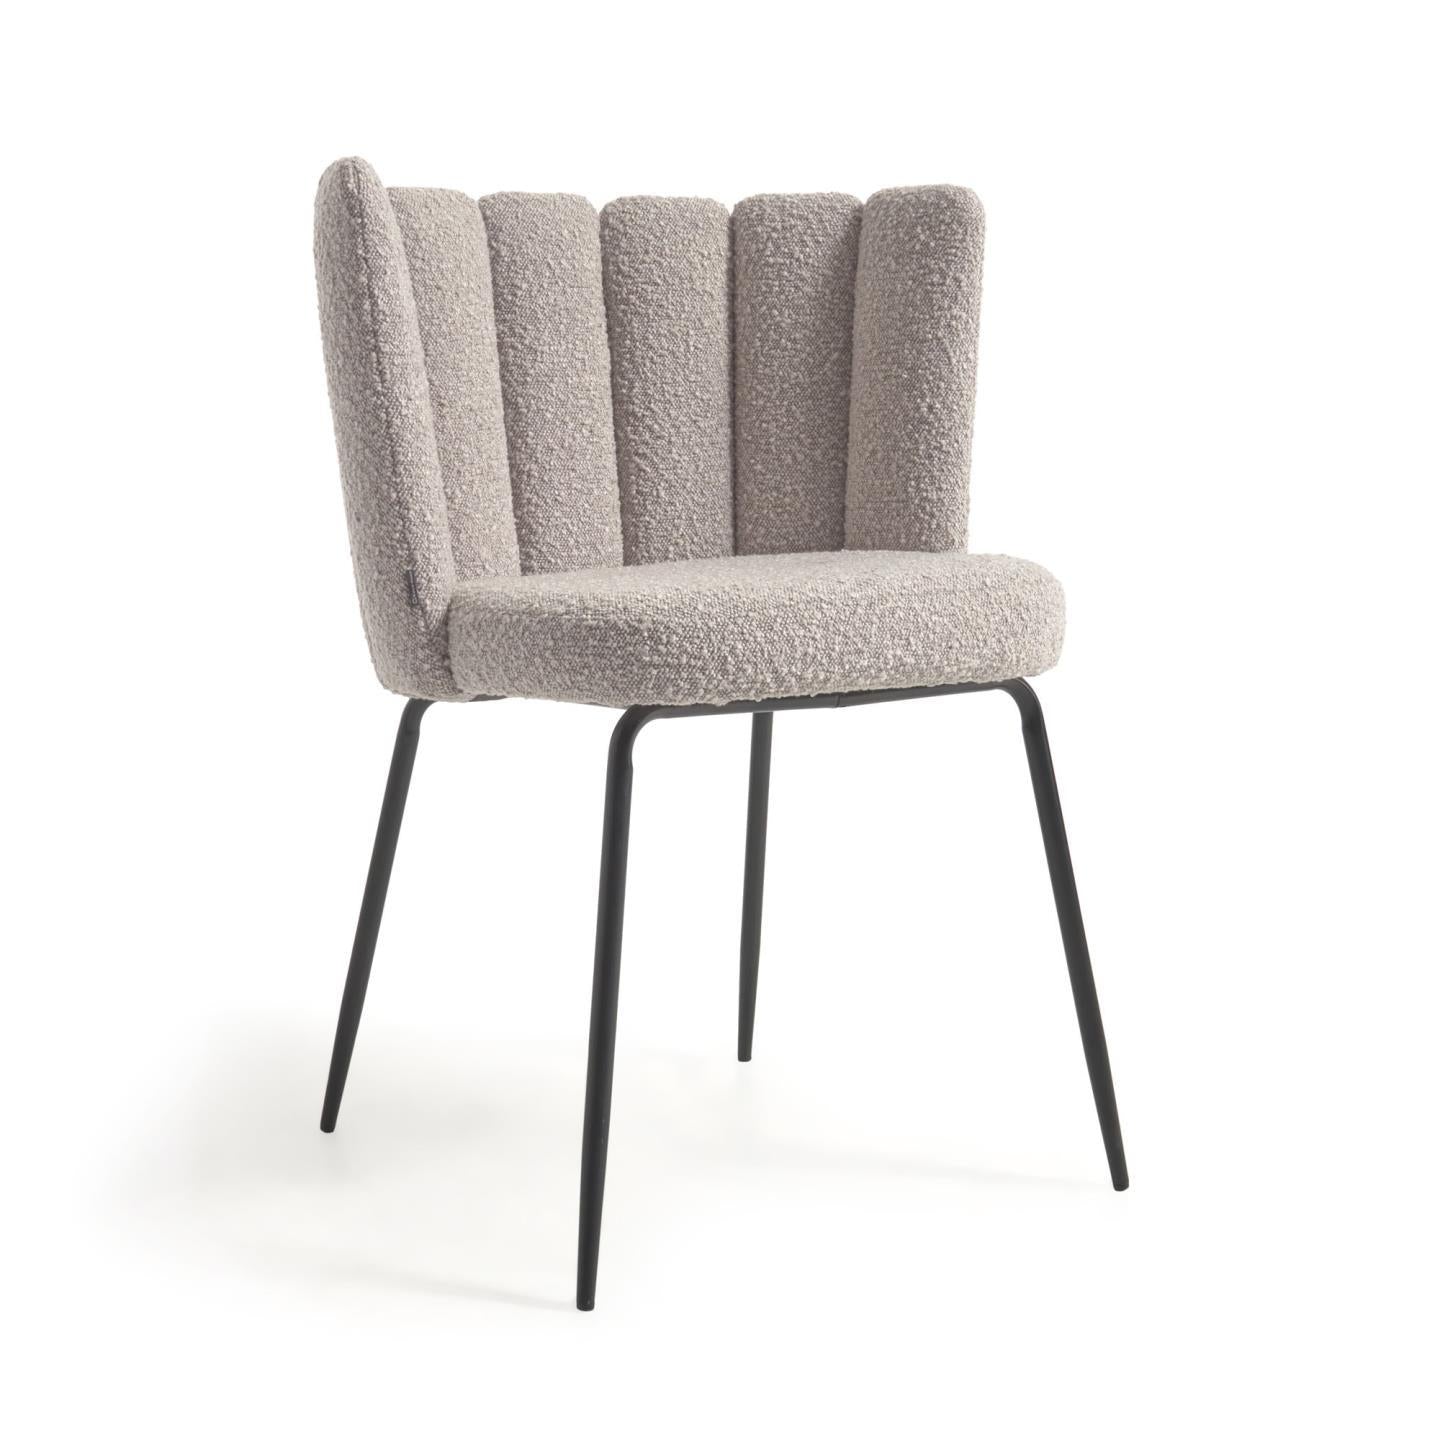 Aniela chair in grey shearling and metal with black finish